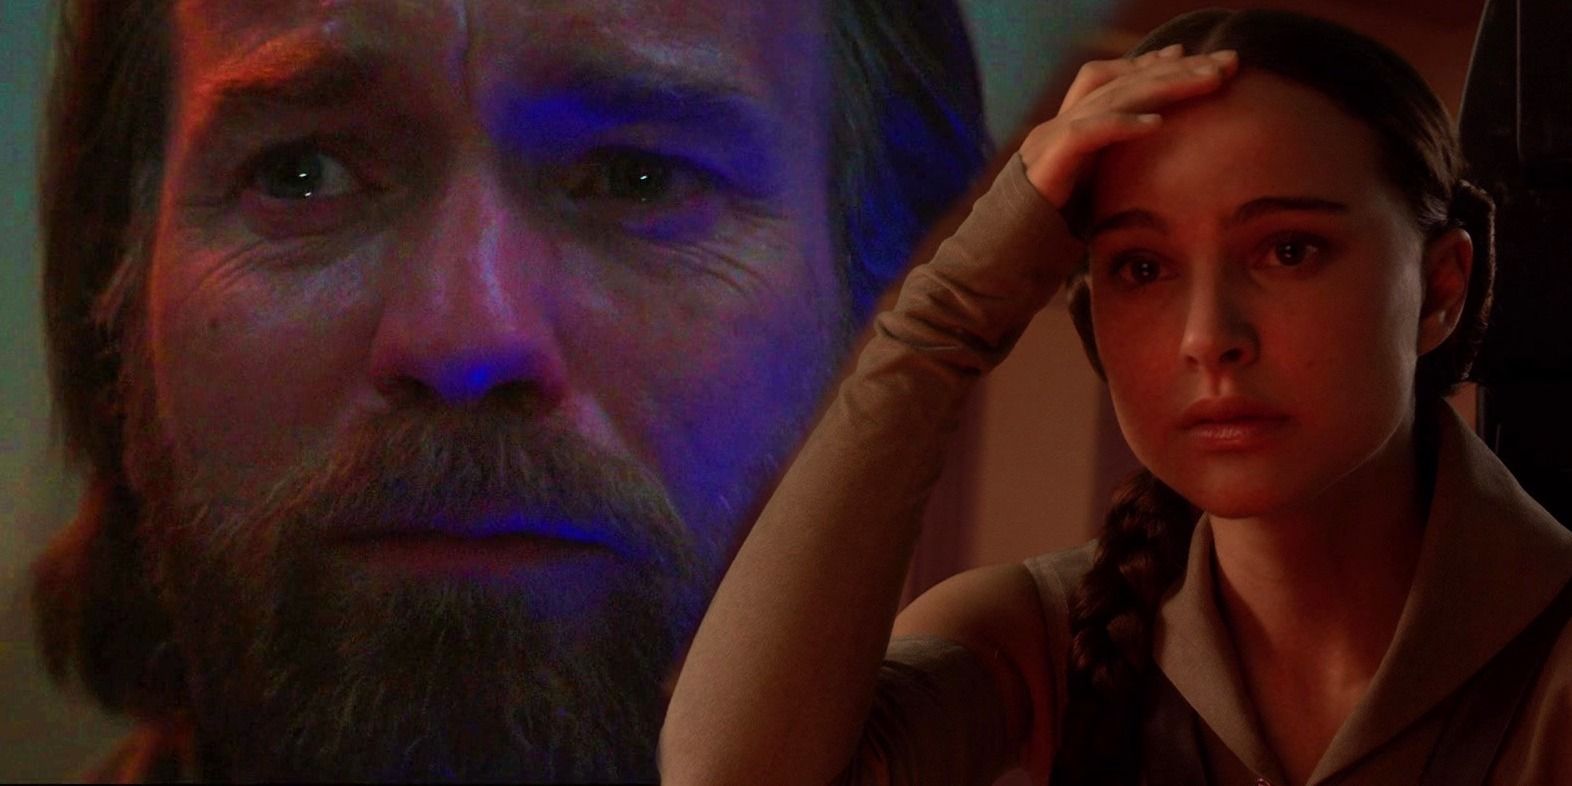 Obi-Wan with tears in his eyes from the Obi-Wan Kenobi show to the left and Padme holding her head looking upset in Revenge of the Sith to the right